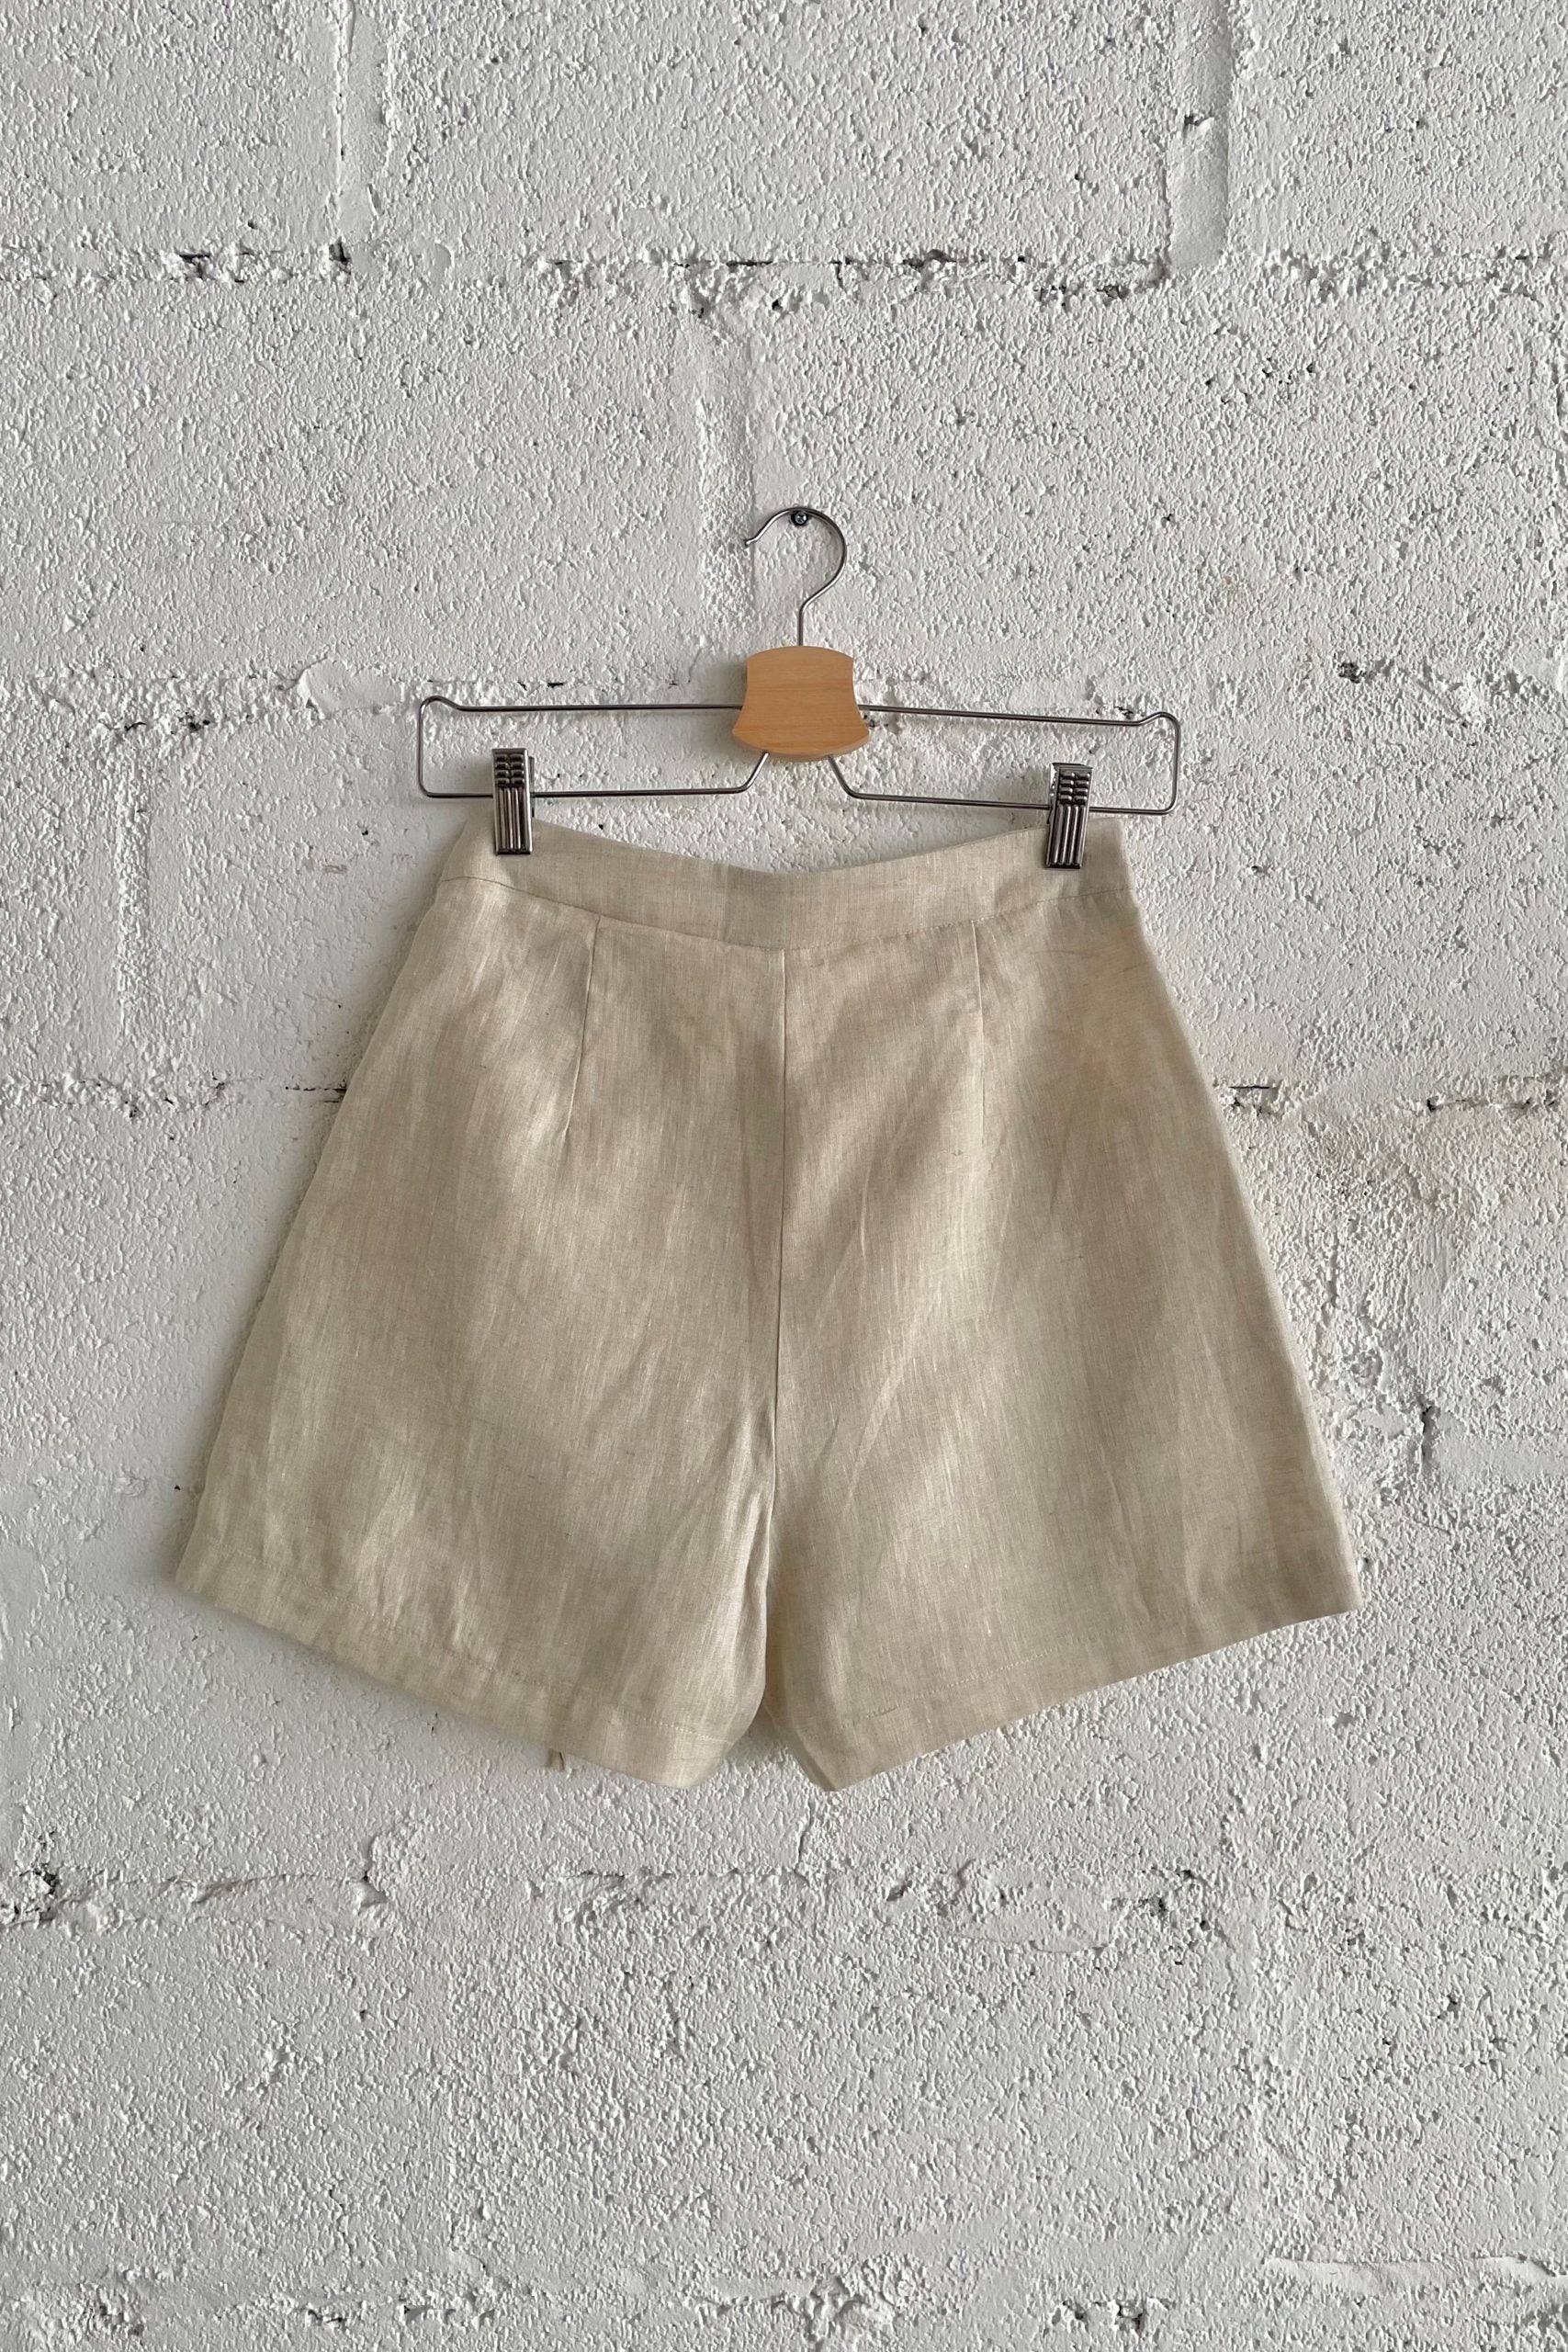 FLARE SHORTS in linen